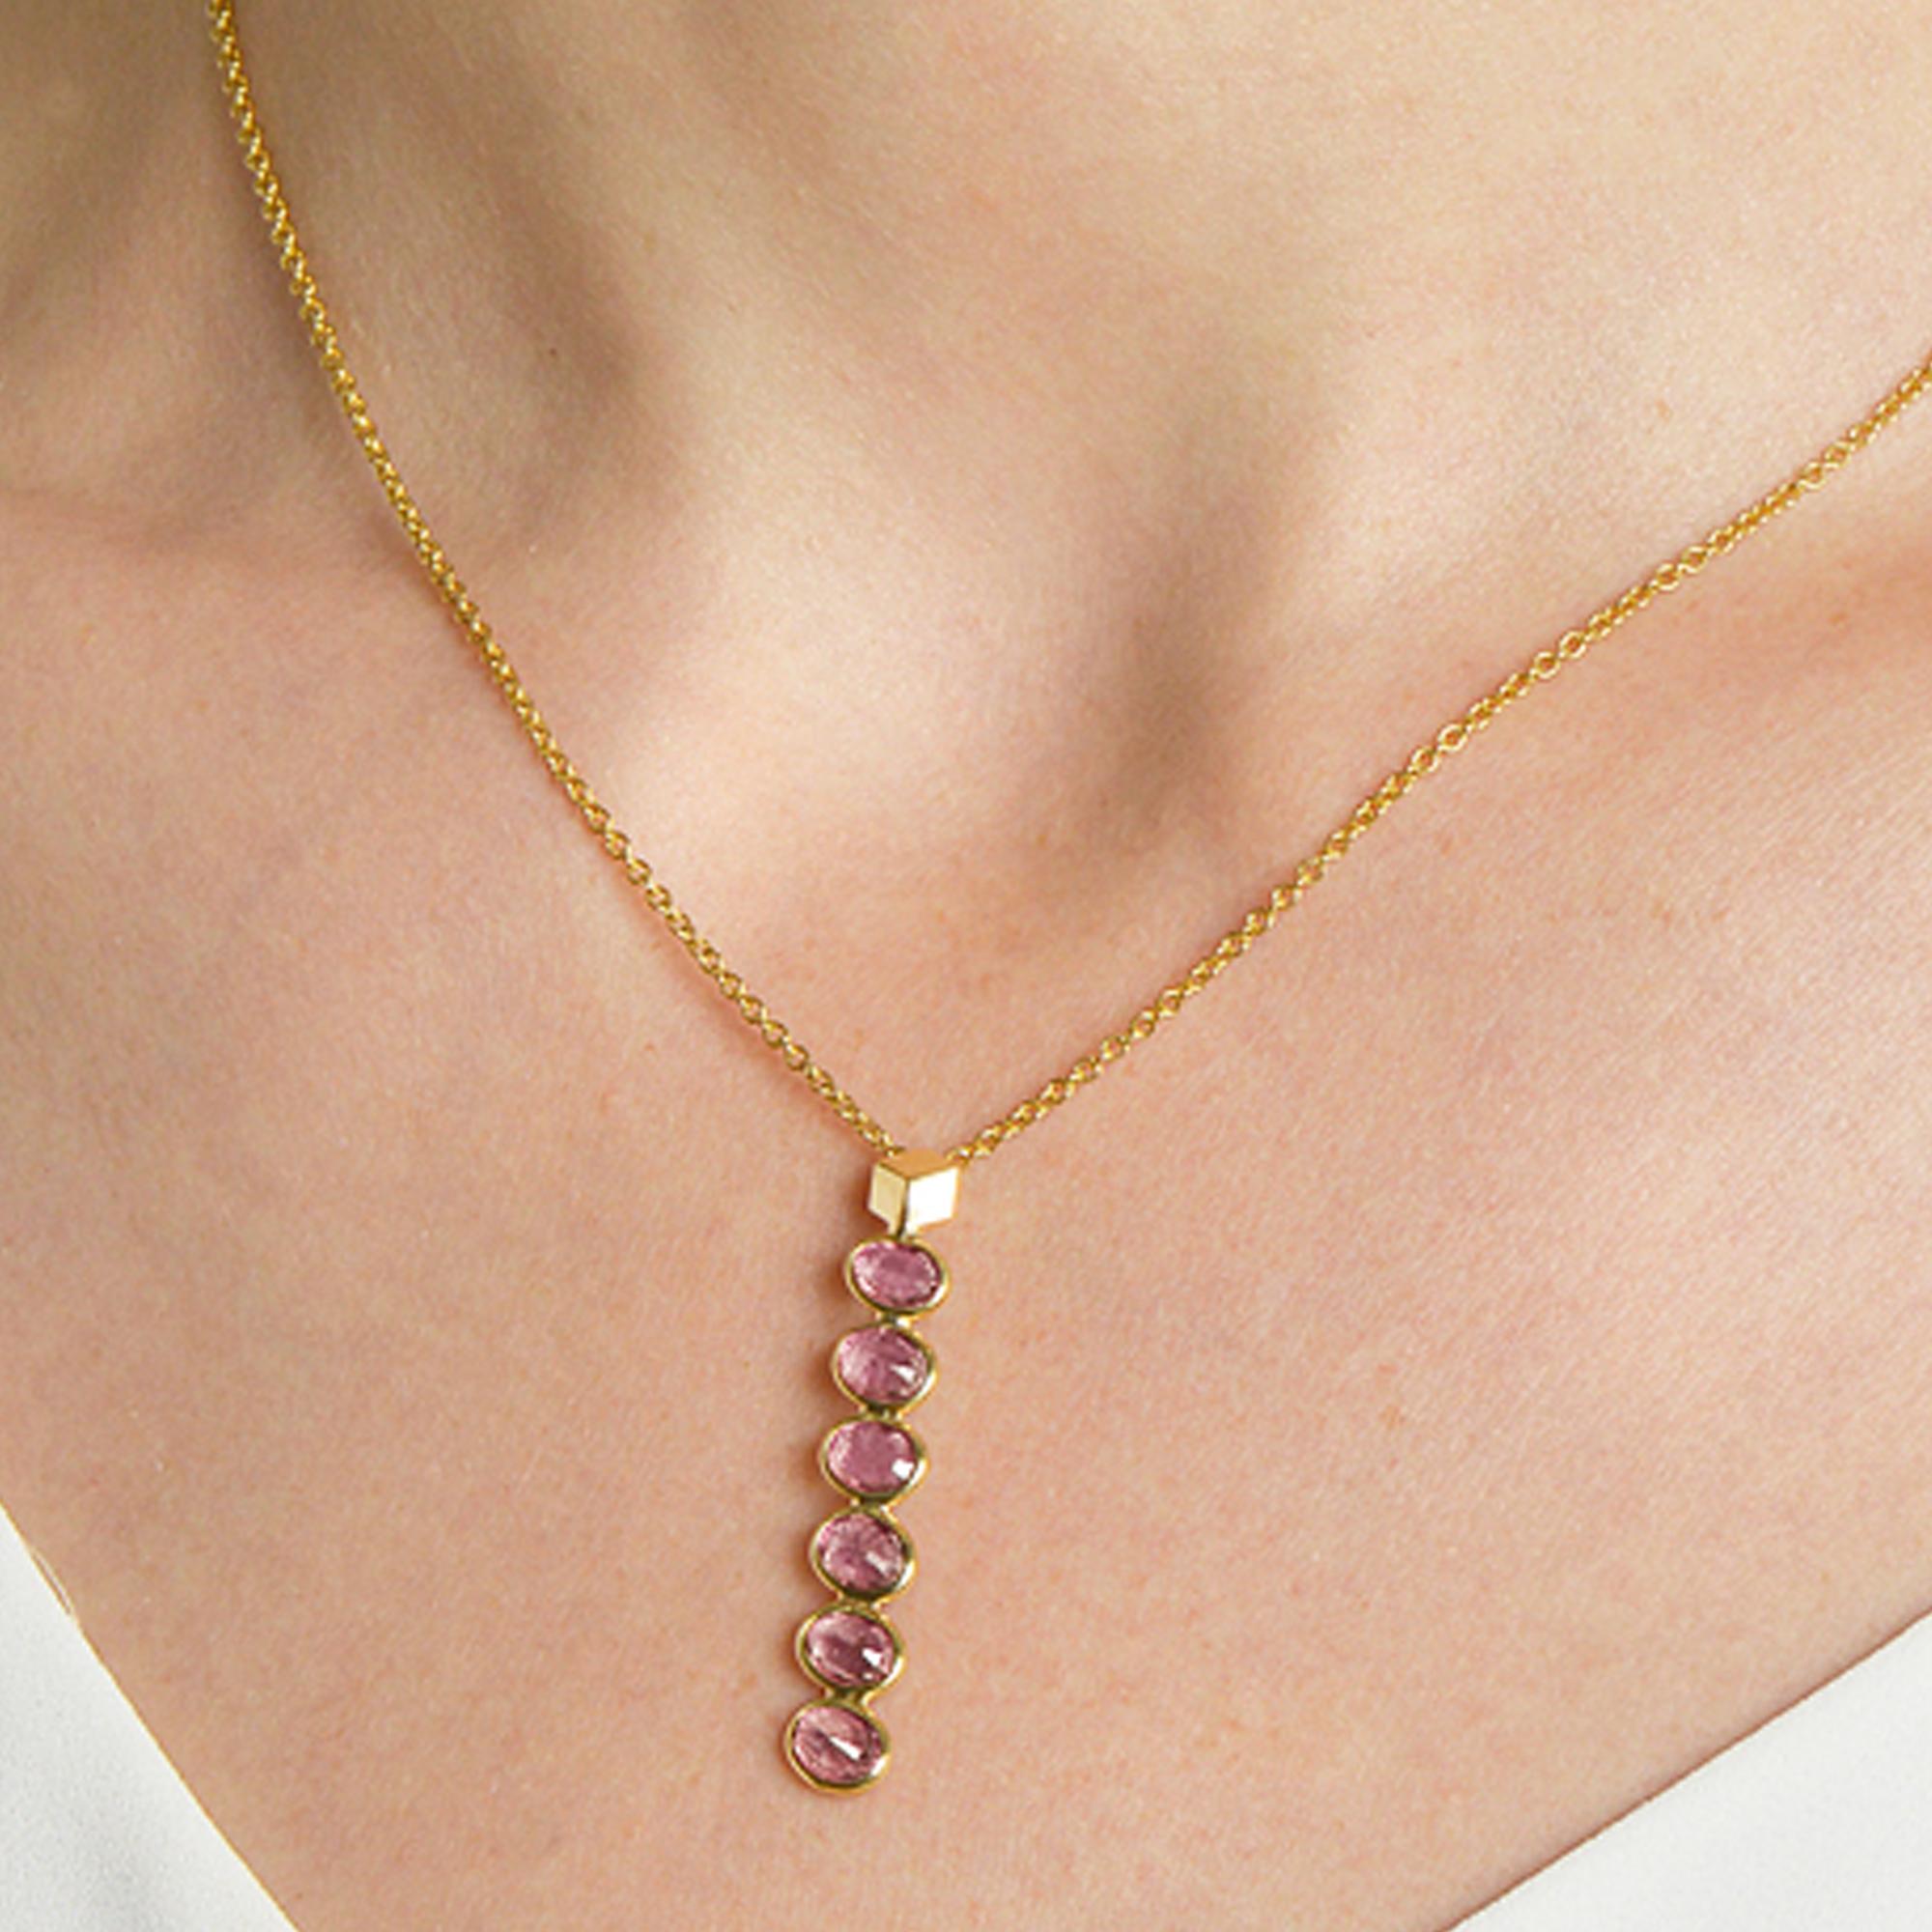 Contemporary Paolo Costagli 18 Karat Yellow Gold Pink Sapphire Ombre Pendant Necklace